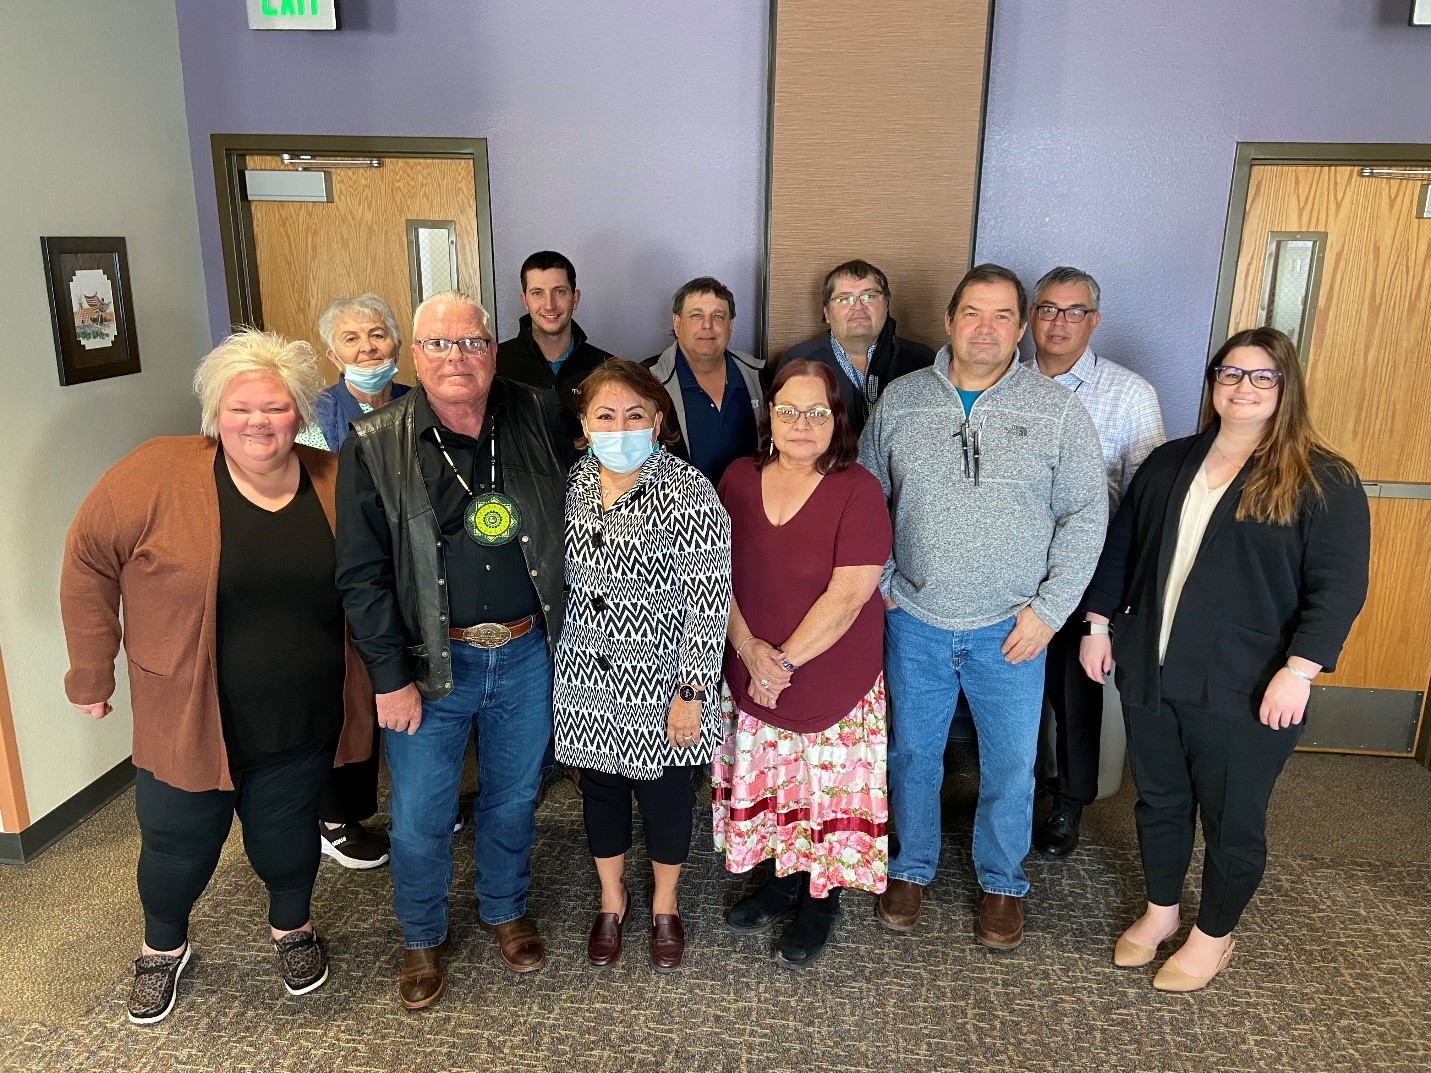 Visit with the Cheyenne River Sioux Tribe at the Cheyenne River Health Center in Eagle Butte, SD, which was followed by a tour of the health center